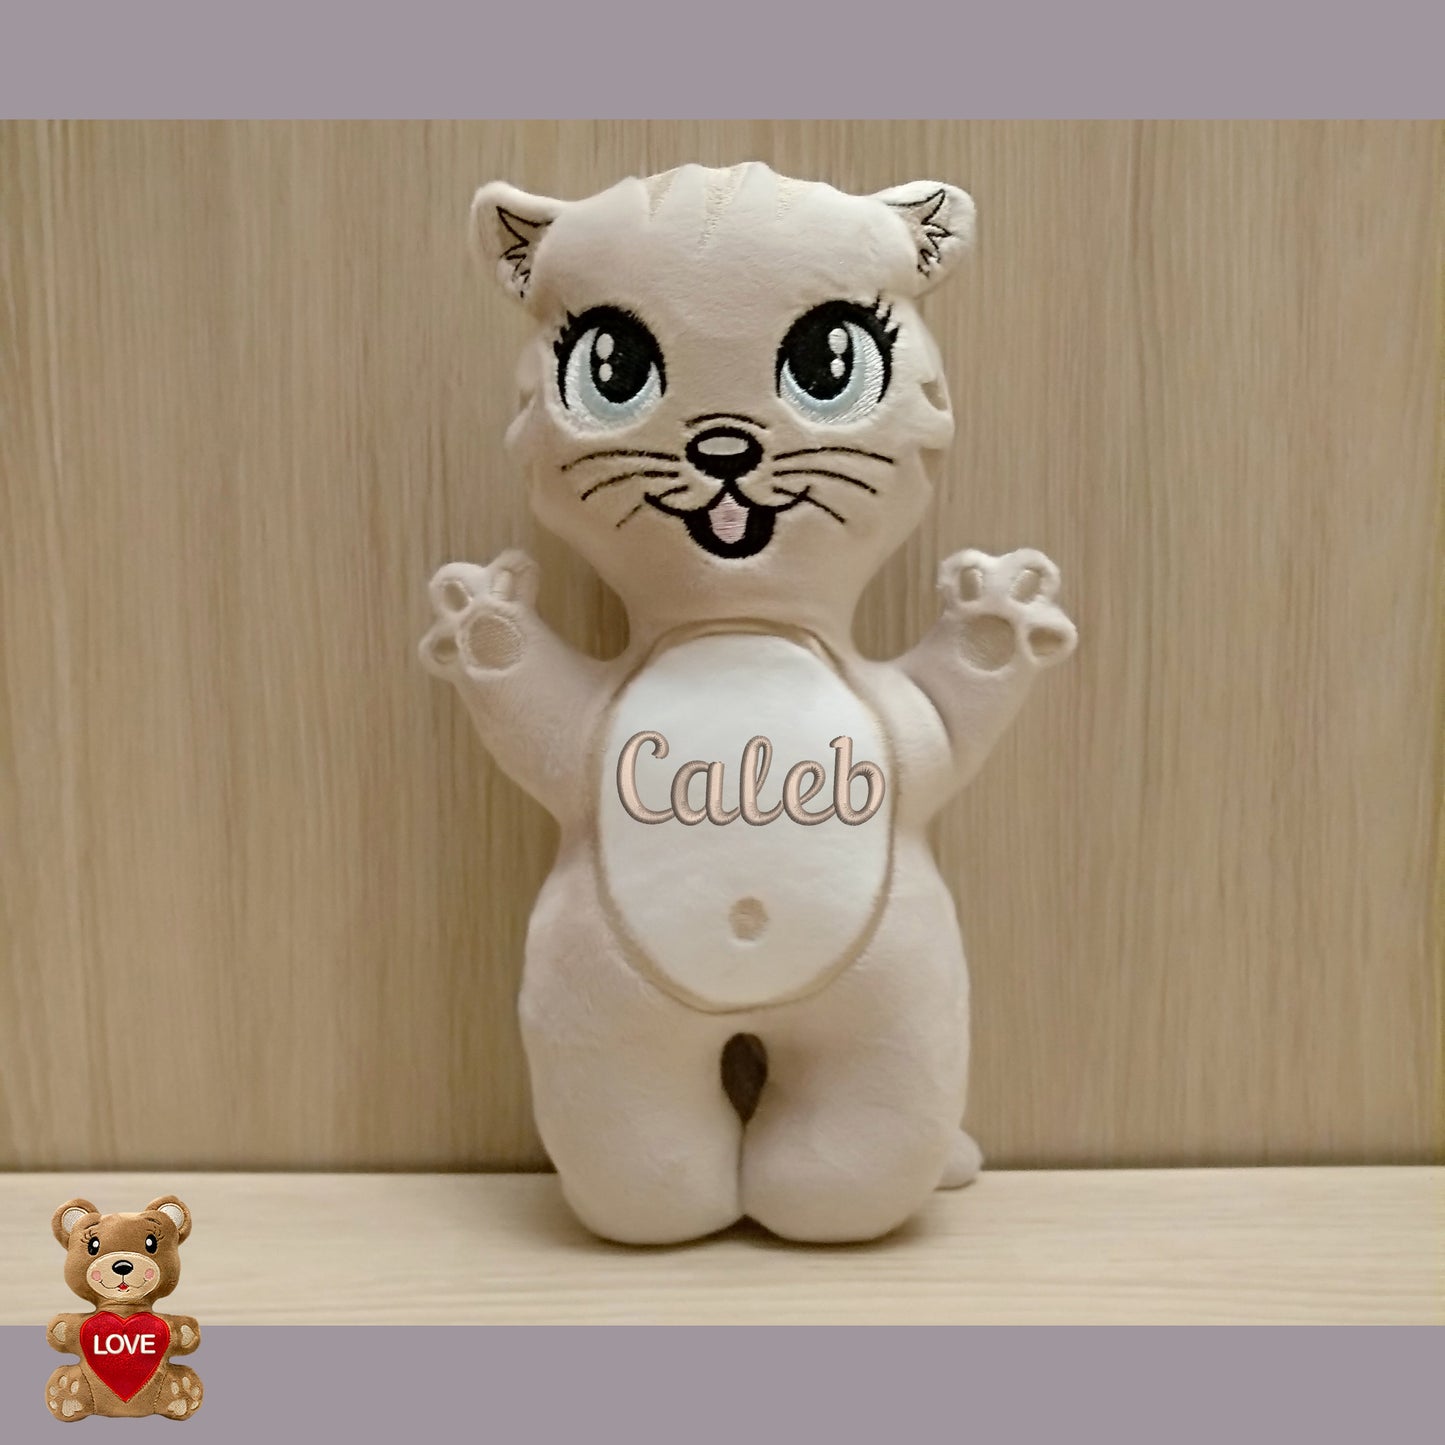 Personalised Cat Stuffed toy ,Super cute personalised soft plush toy, Personalised Gift, Unique Personalized Birthday Gifts , Custom Gifts For Children